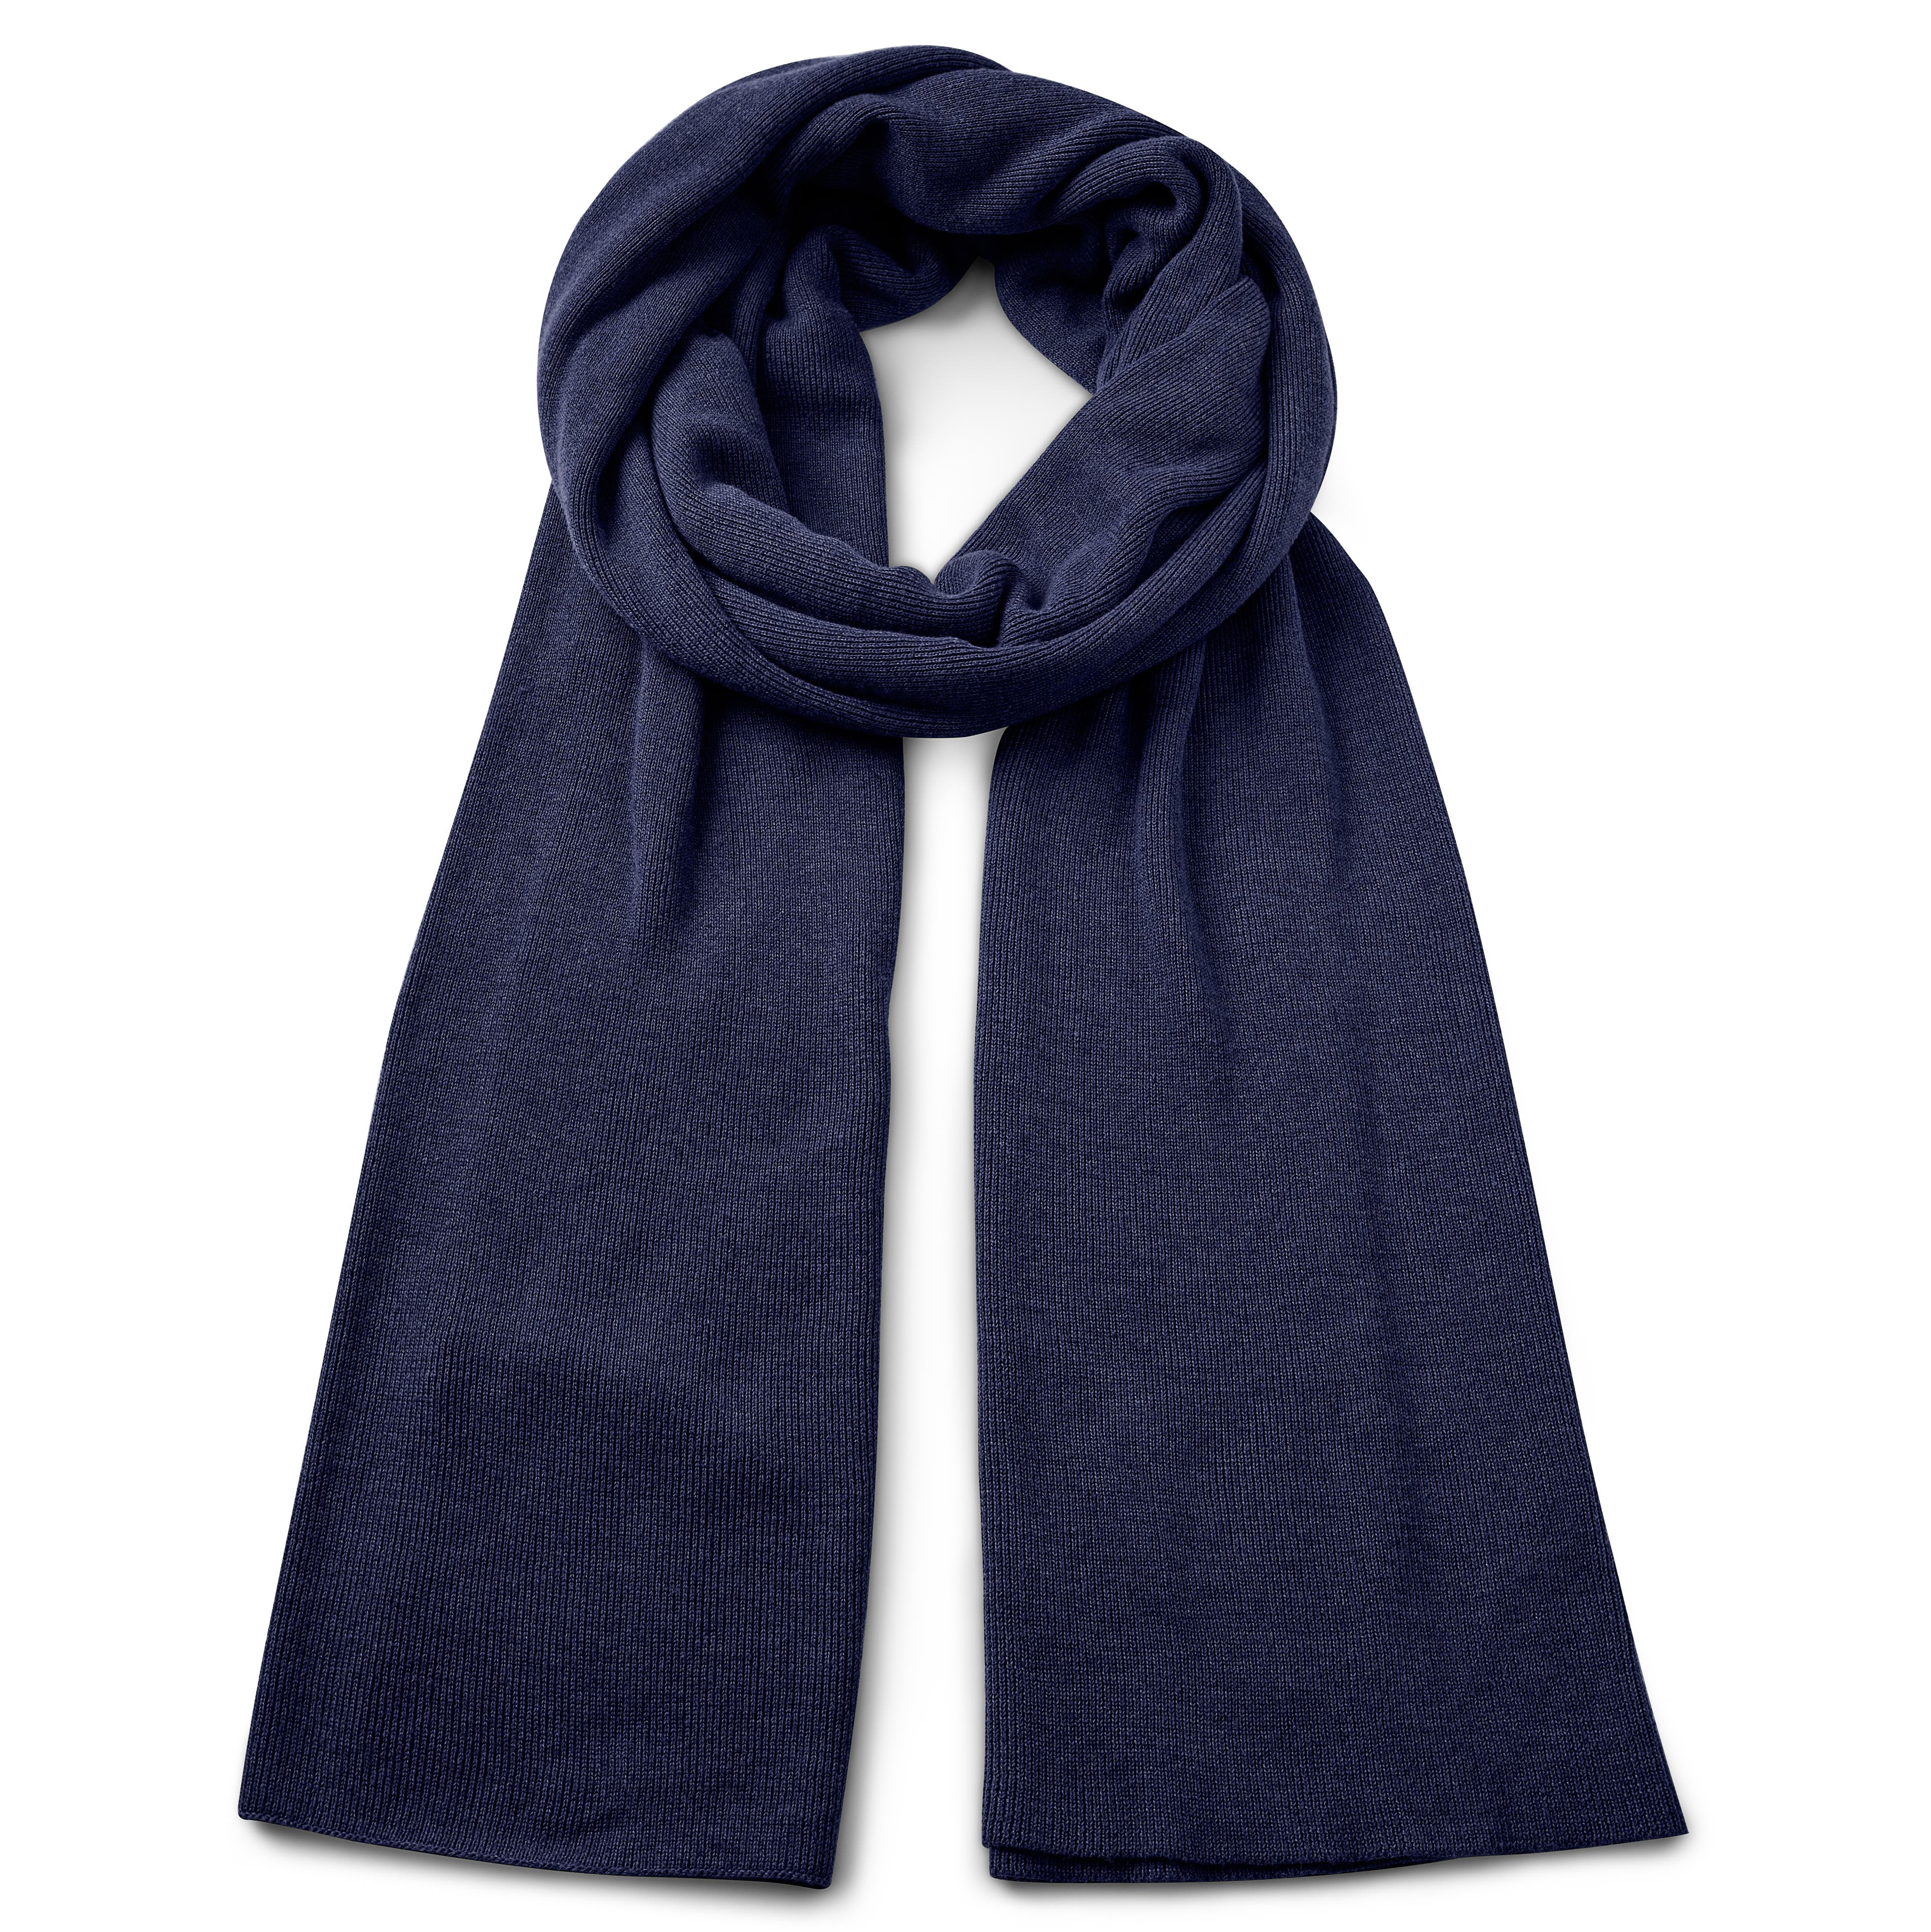 Hiems | Navy Blue Recycled Cotton Scarf